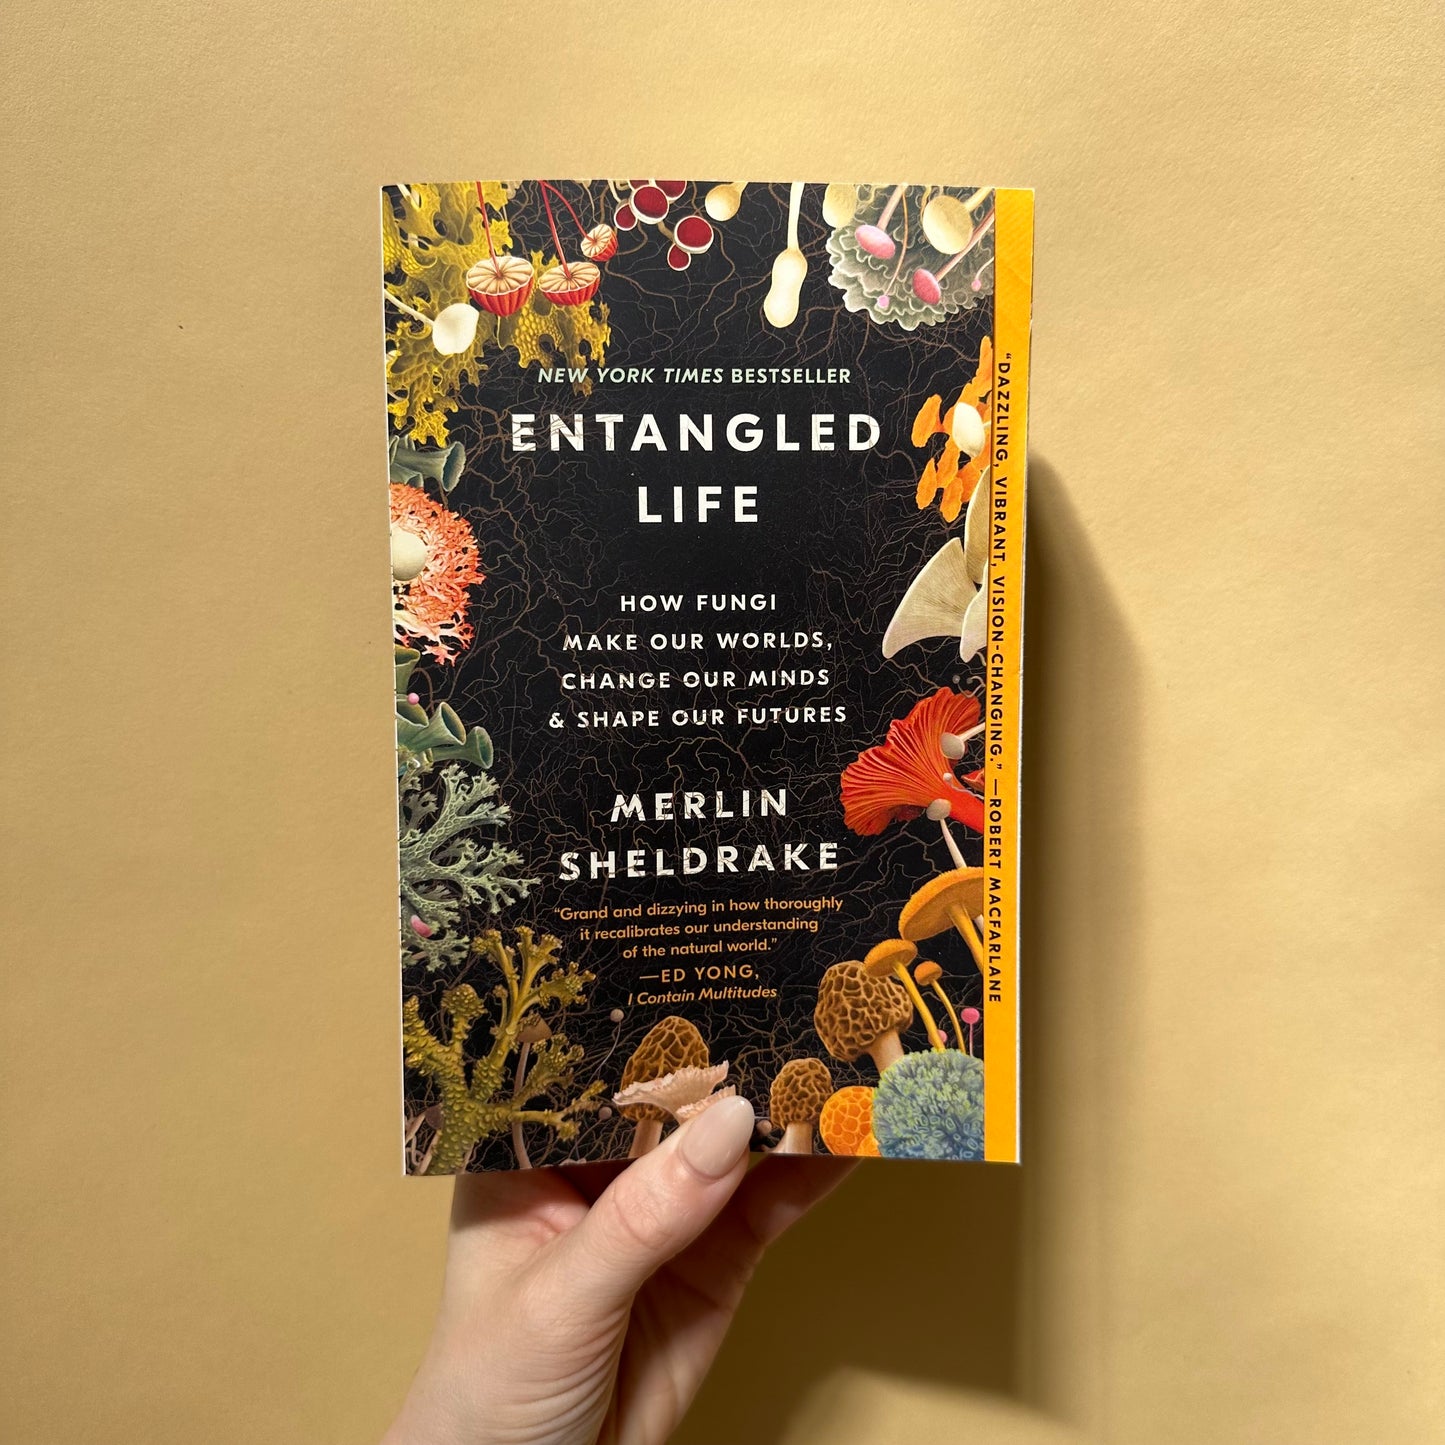 entangled life: how fungi make your worlds, change our minds & shape our futures